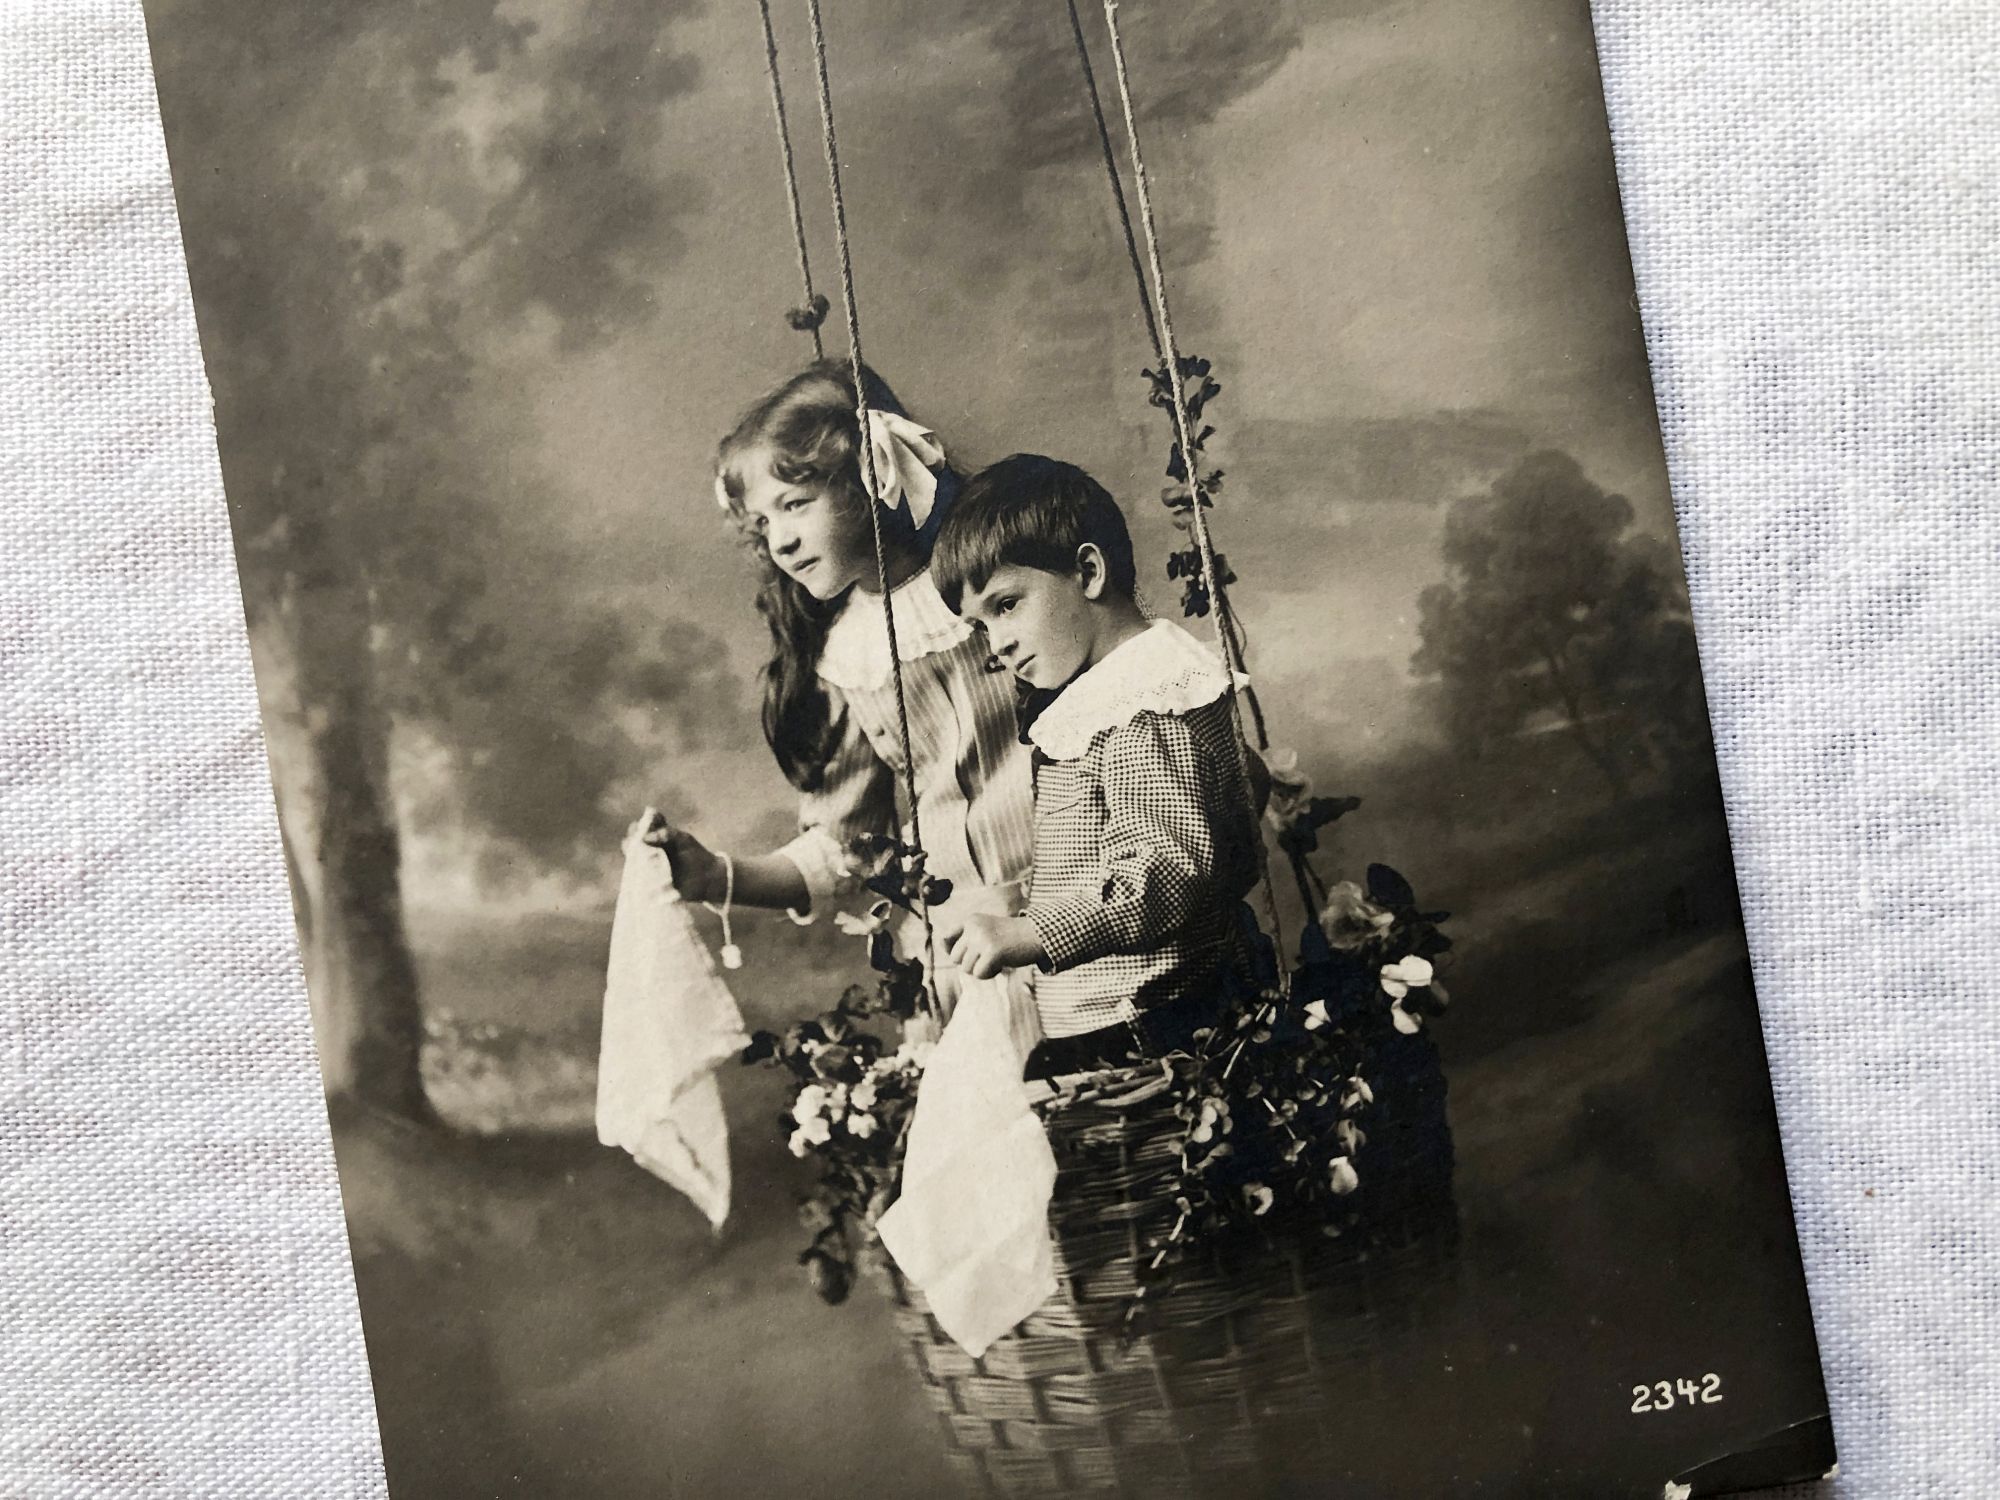 Vintage Belgian postcard representing two children in the basket of a hot-air balloon